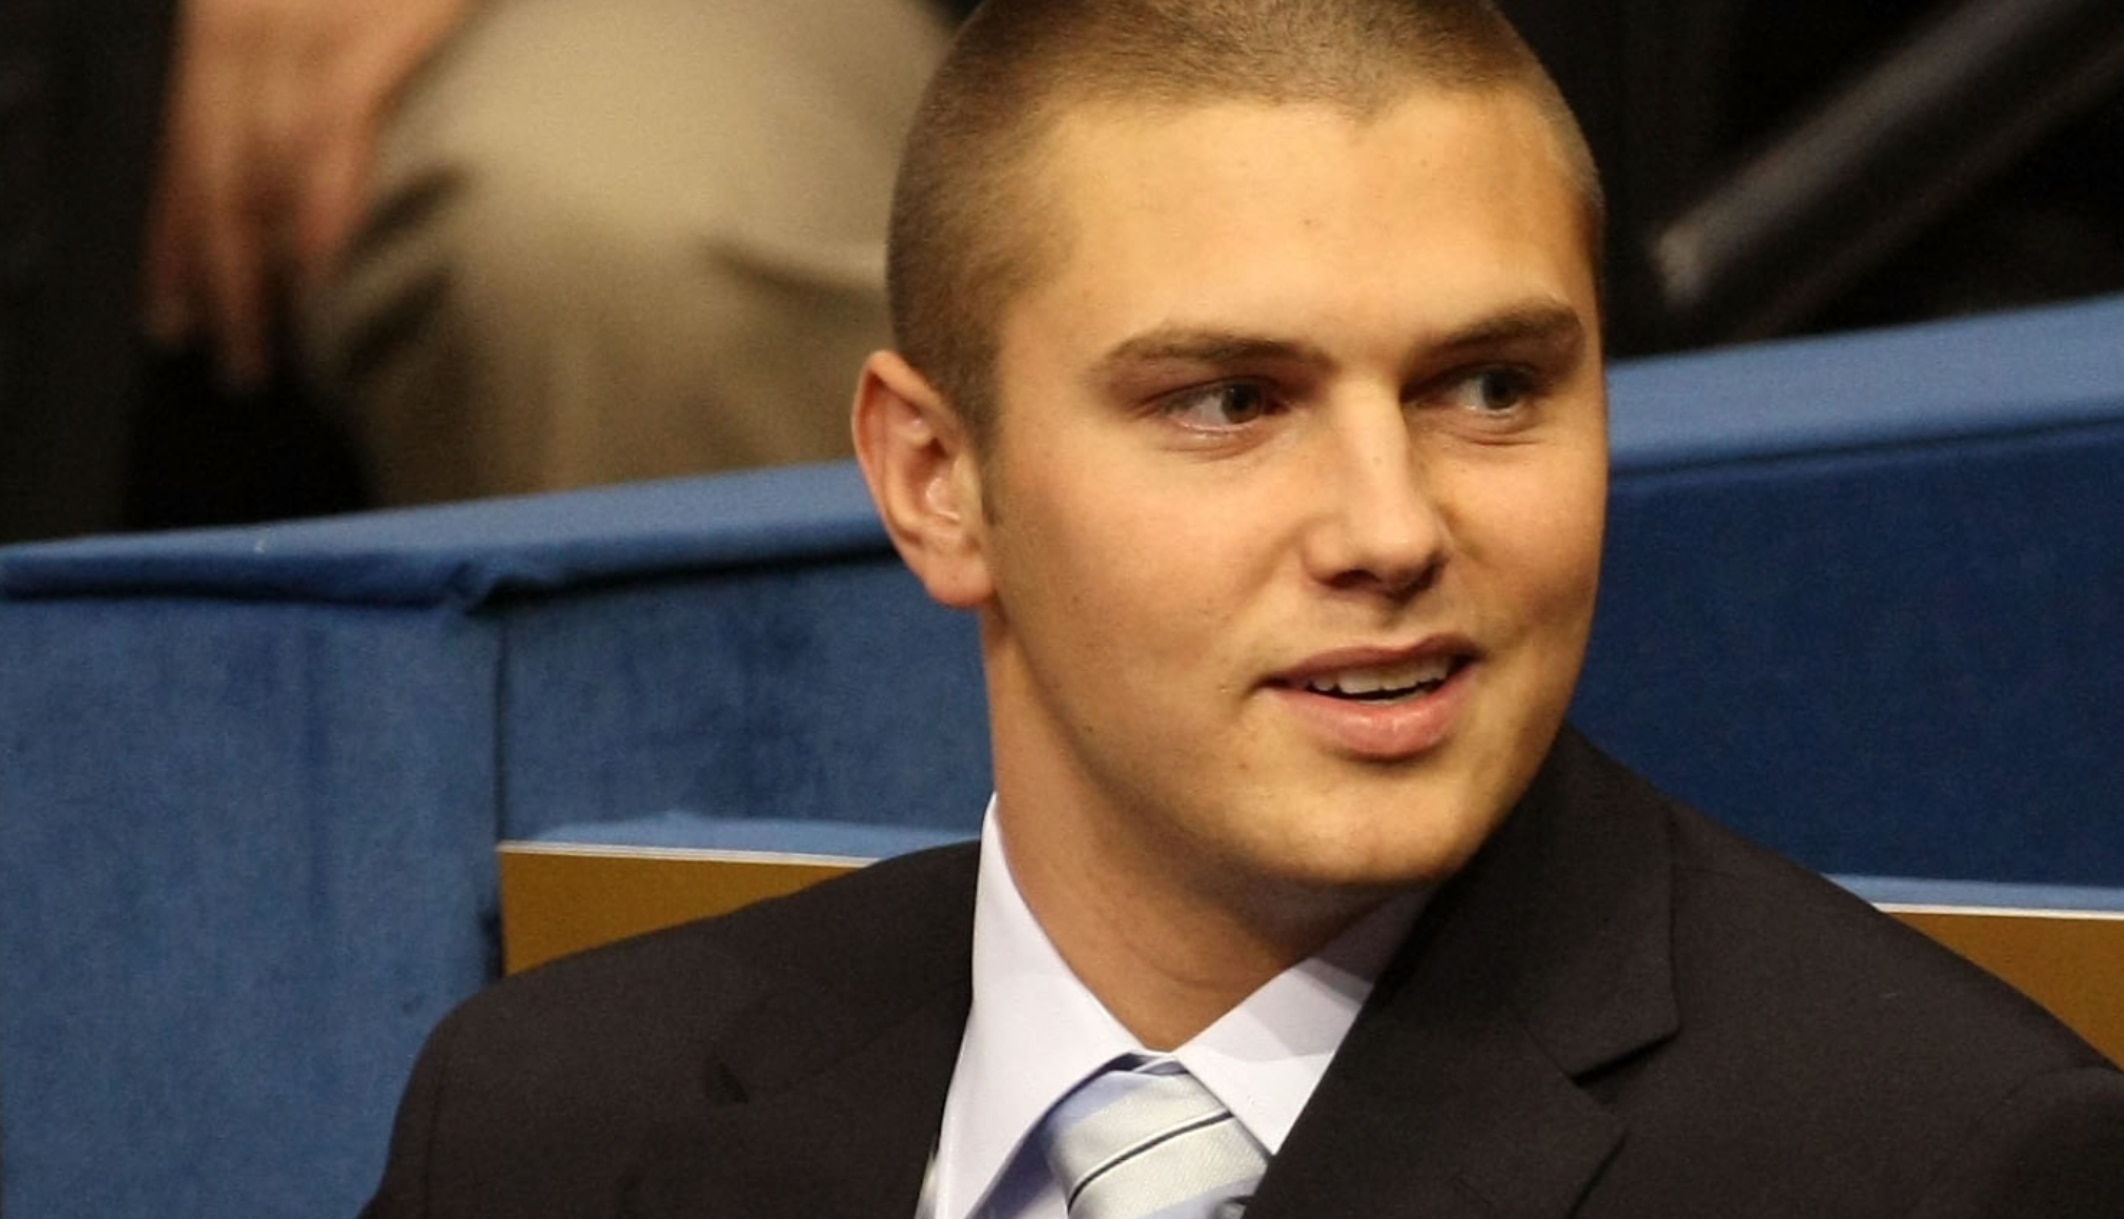 Sarah Palin39s Son Track Arrested On Domestic Violence